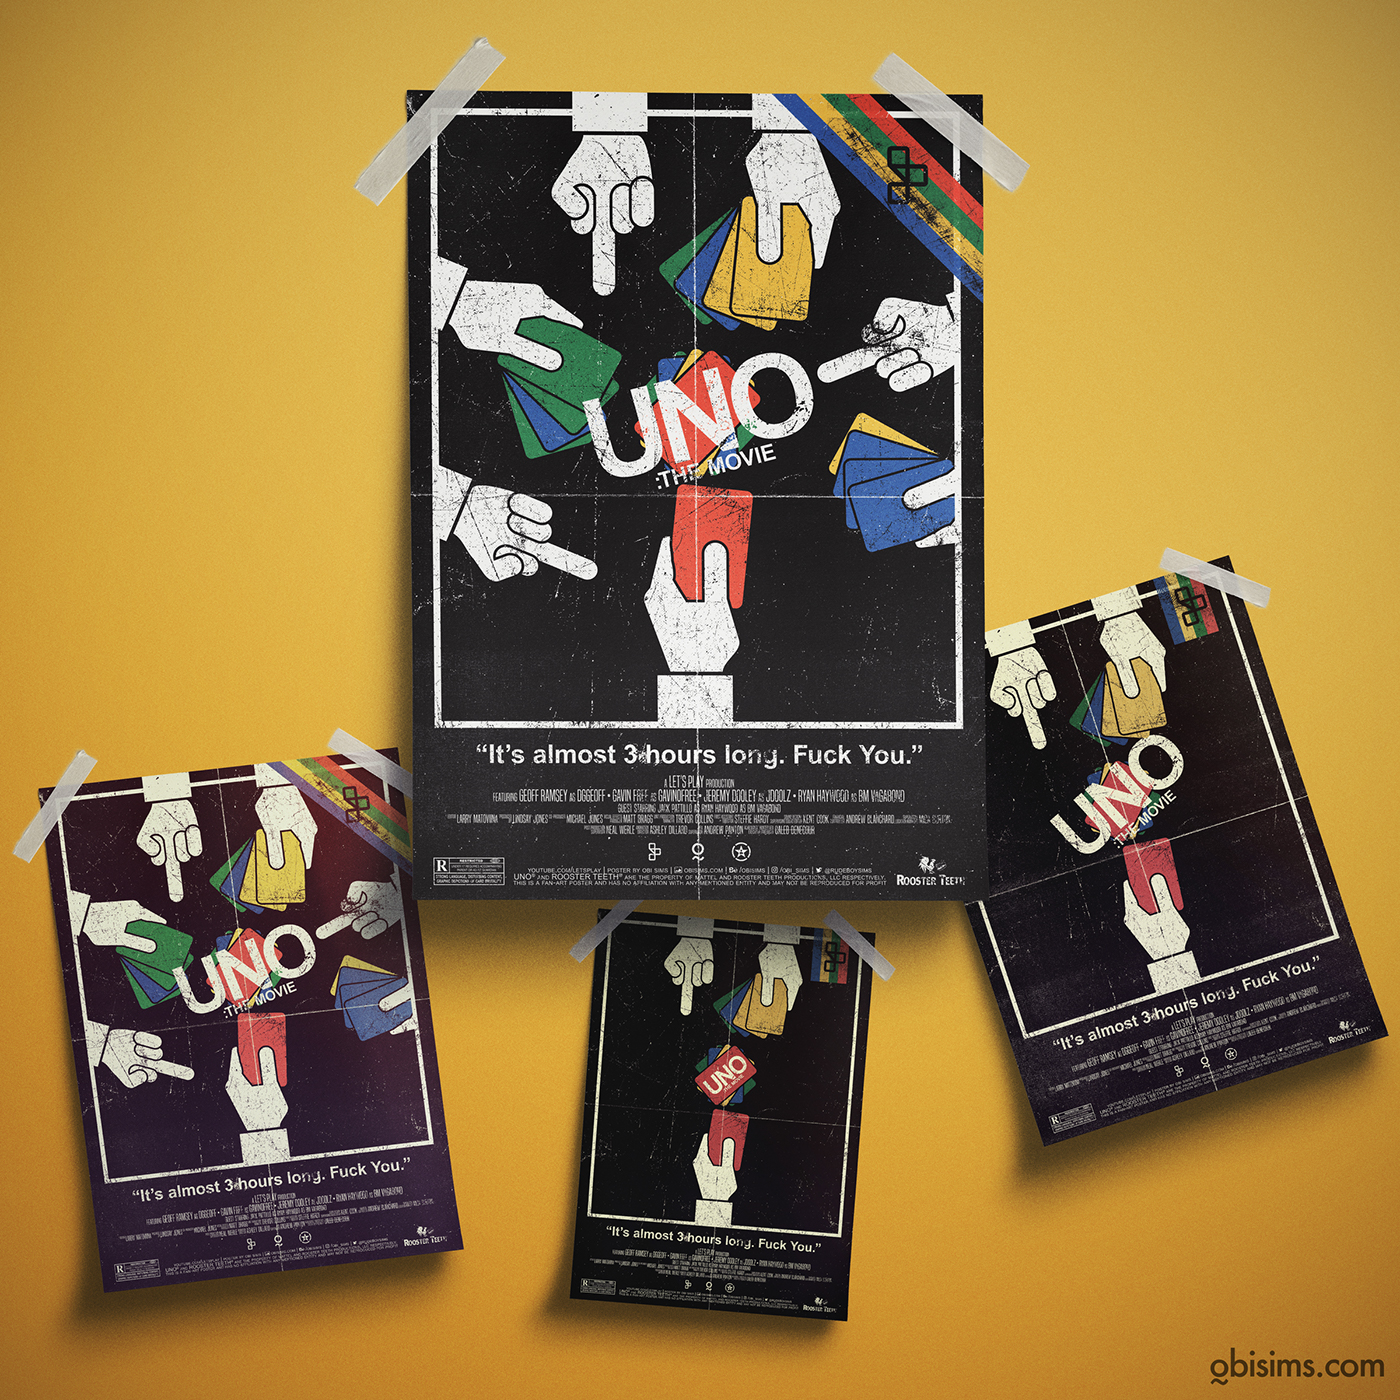 Rooster teeth UNO uno the movie poster free fan art obi sims rudeboysims